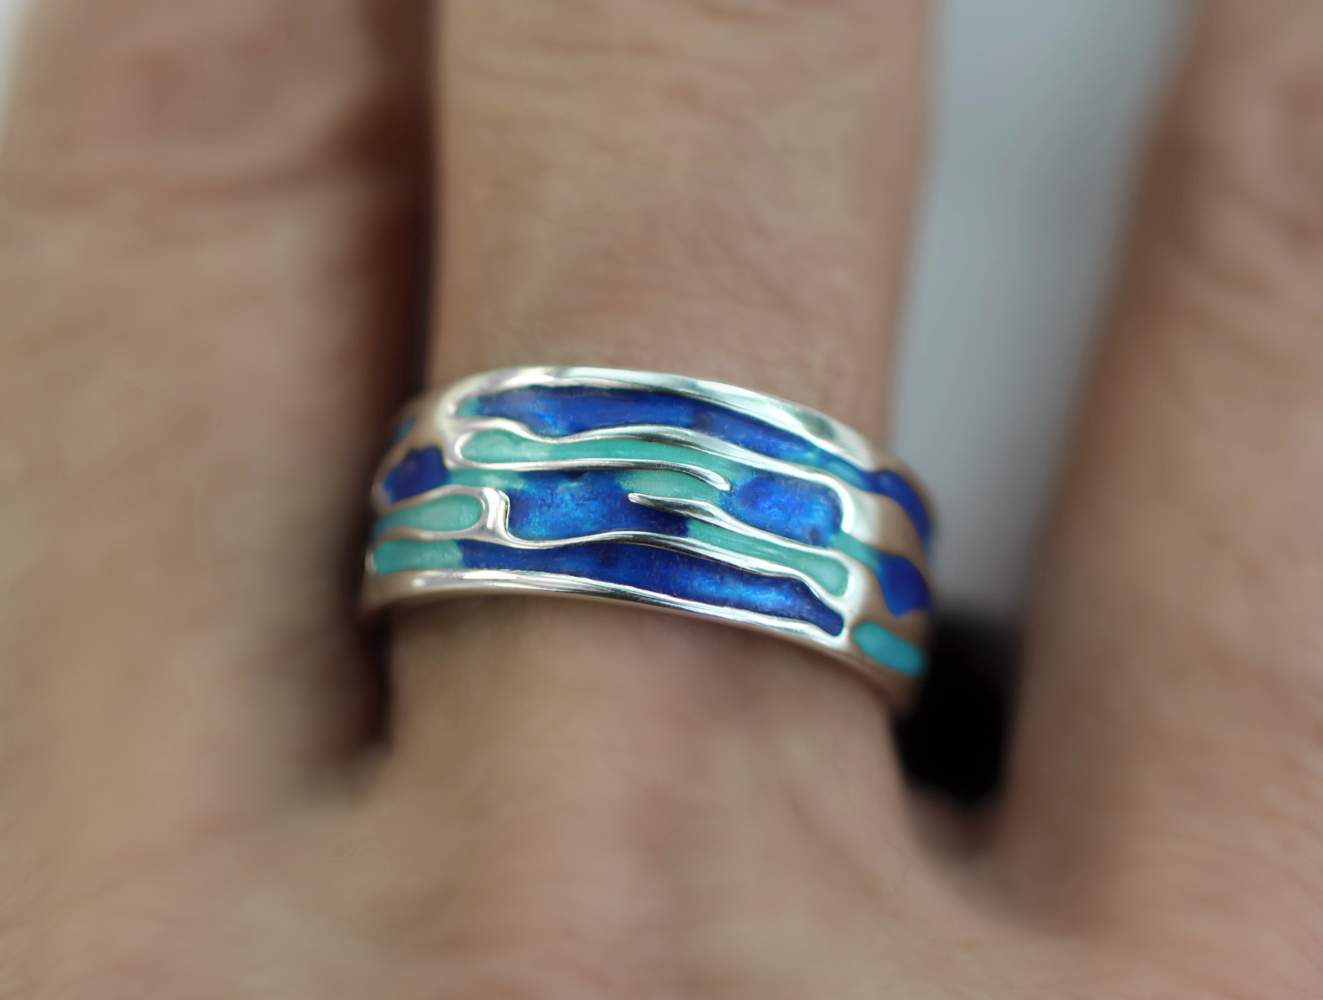 Ocean Ring. Sterling Silver ring with embedded waves and blue turquoise enamel. Adjustable.